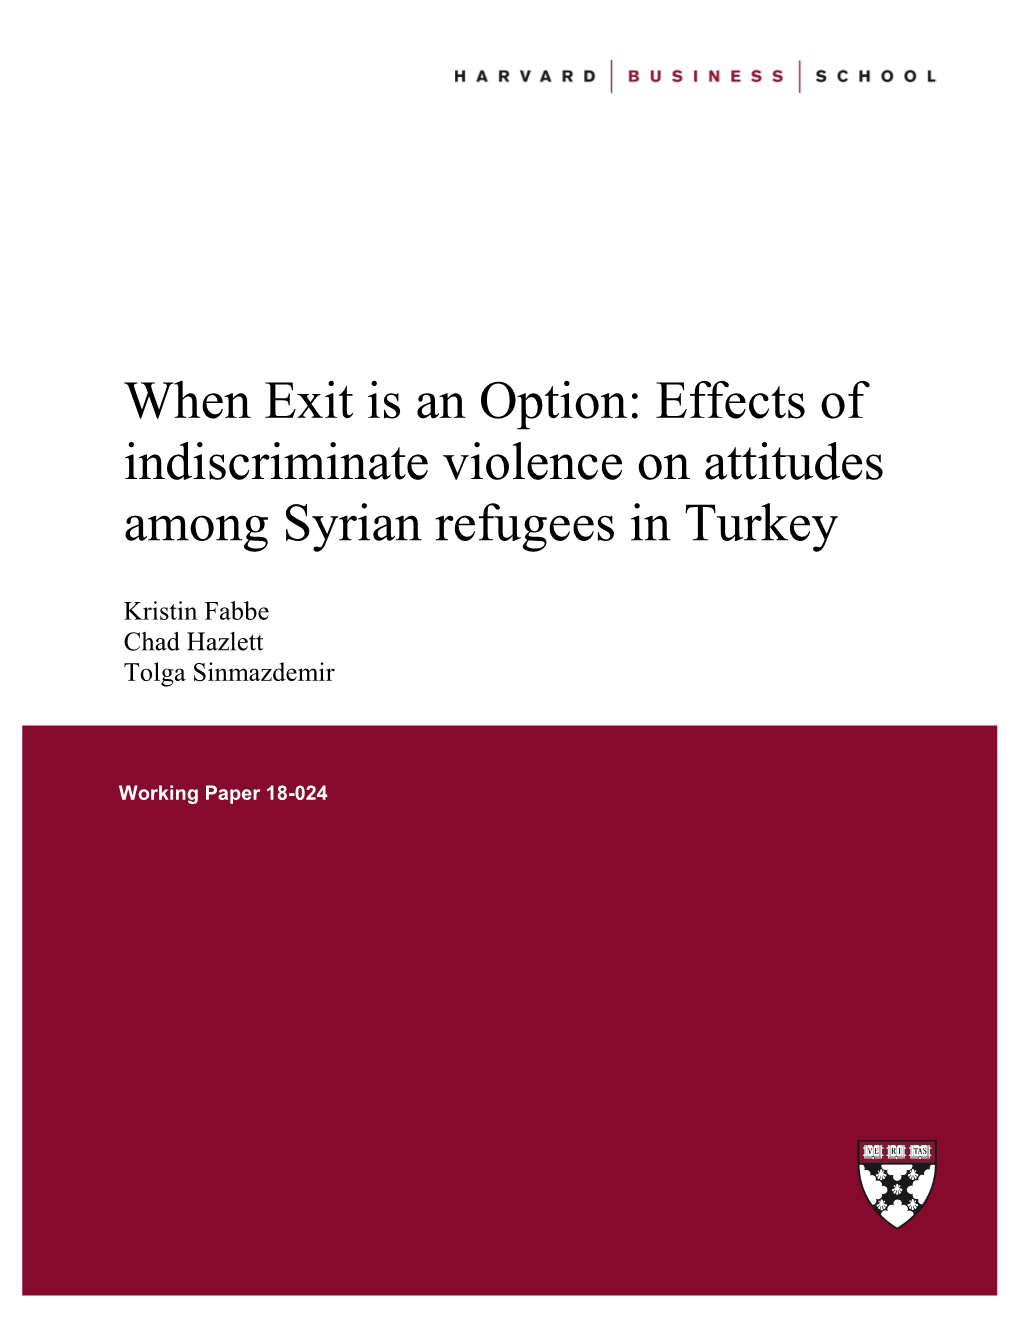 When Exit Is an Option: Effects of Indiscriminate Violence on Attitudes Among Syrian Refugees in Turkey